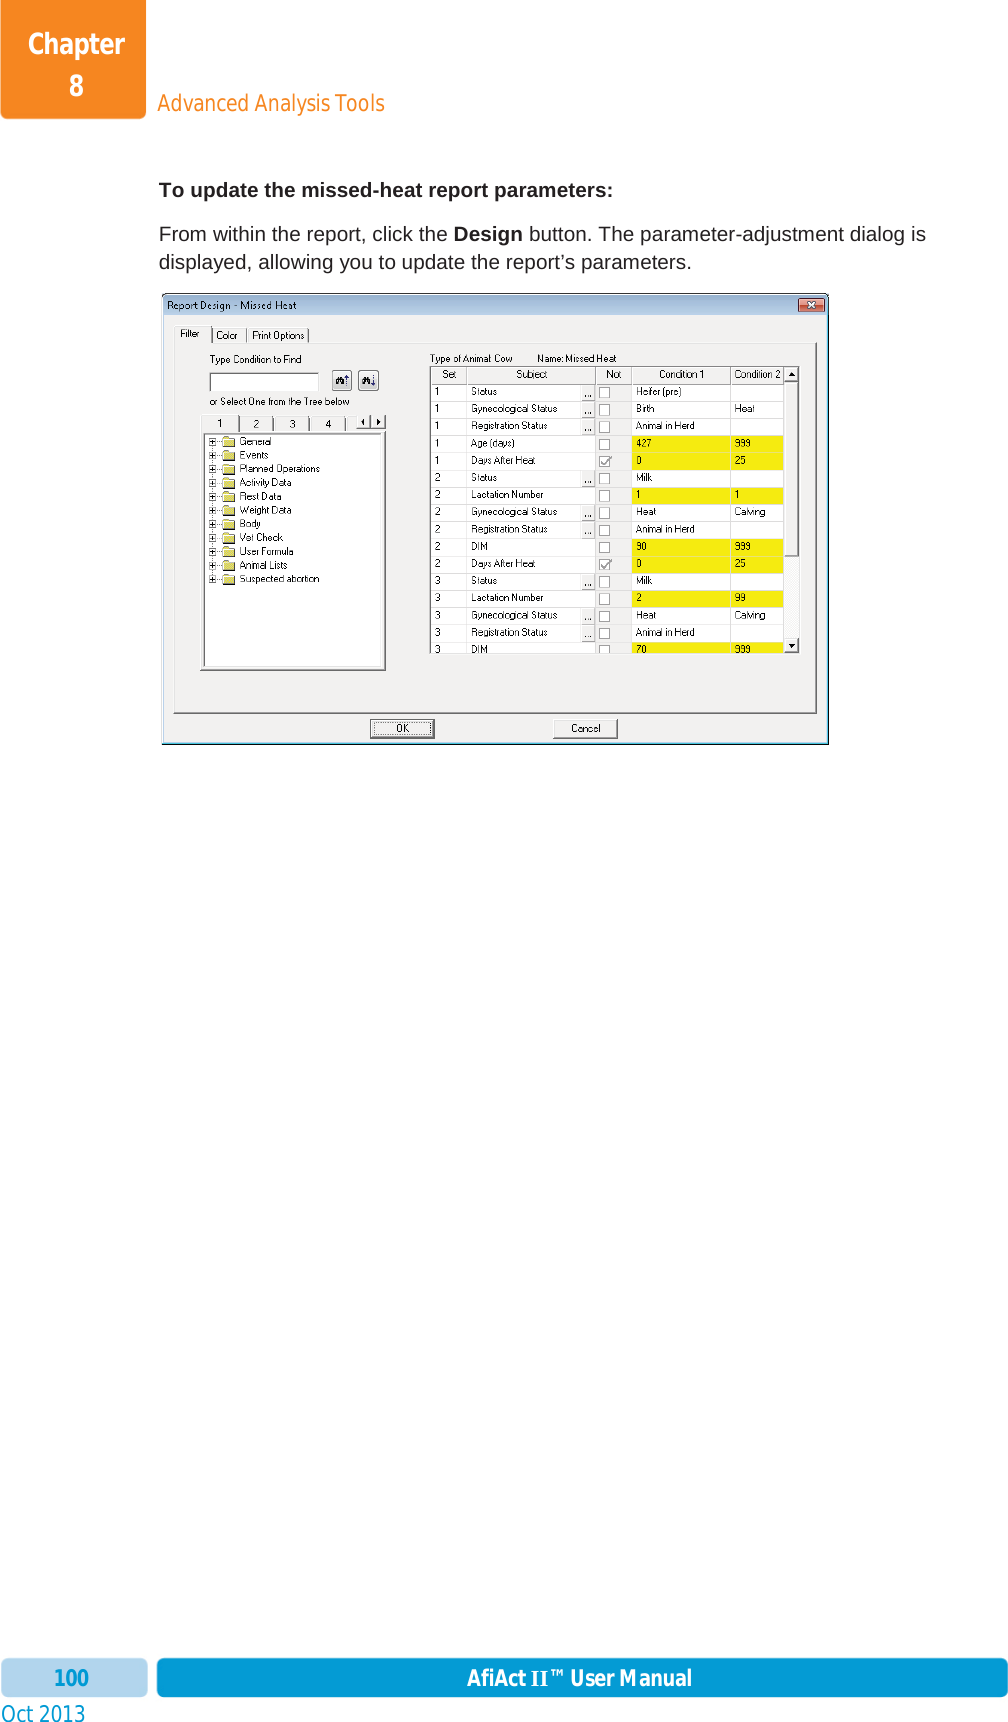 Oct 2013 AfiAct II™ User Manual100Advanced Analysis ToolsChapter 8To update the missed-heat report parameters: From within the report, click the Design button. The parameter-adjustment dialog is displayed, allowing you to update the report’s parameters.  